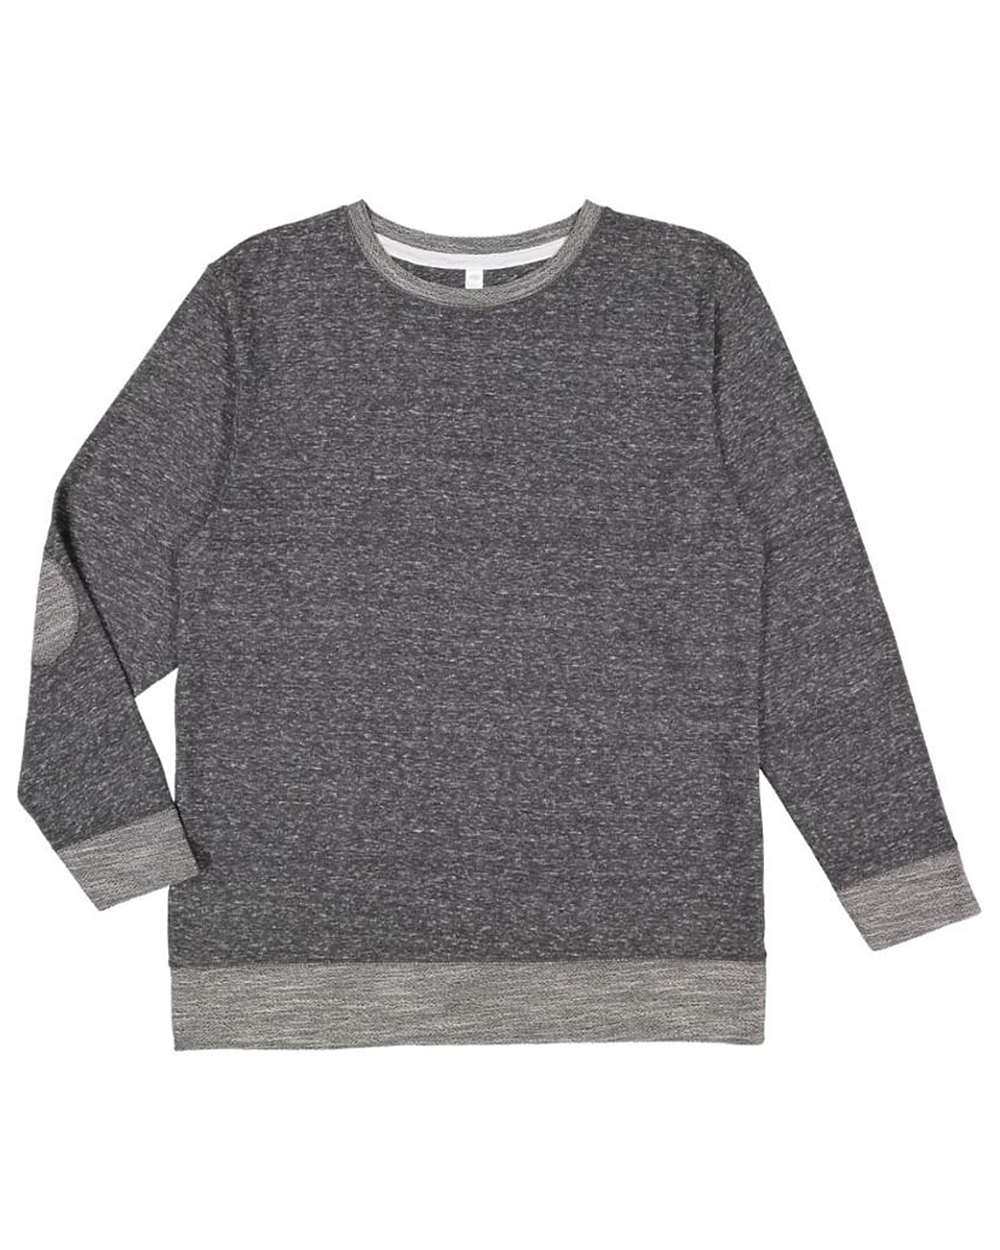 Smoke Melange French Terry Pullover Top - T9540SM